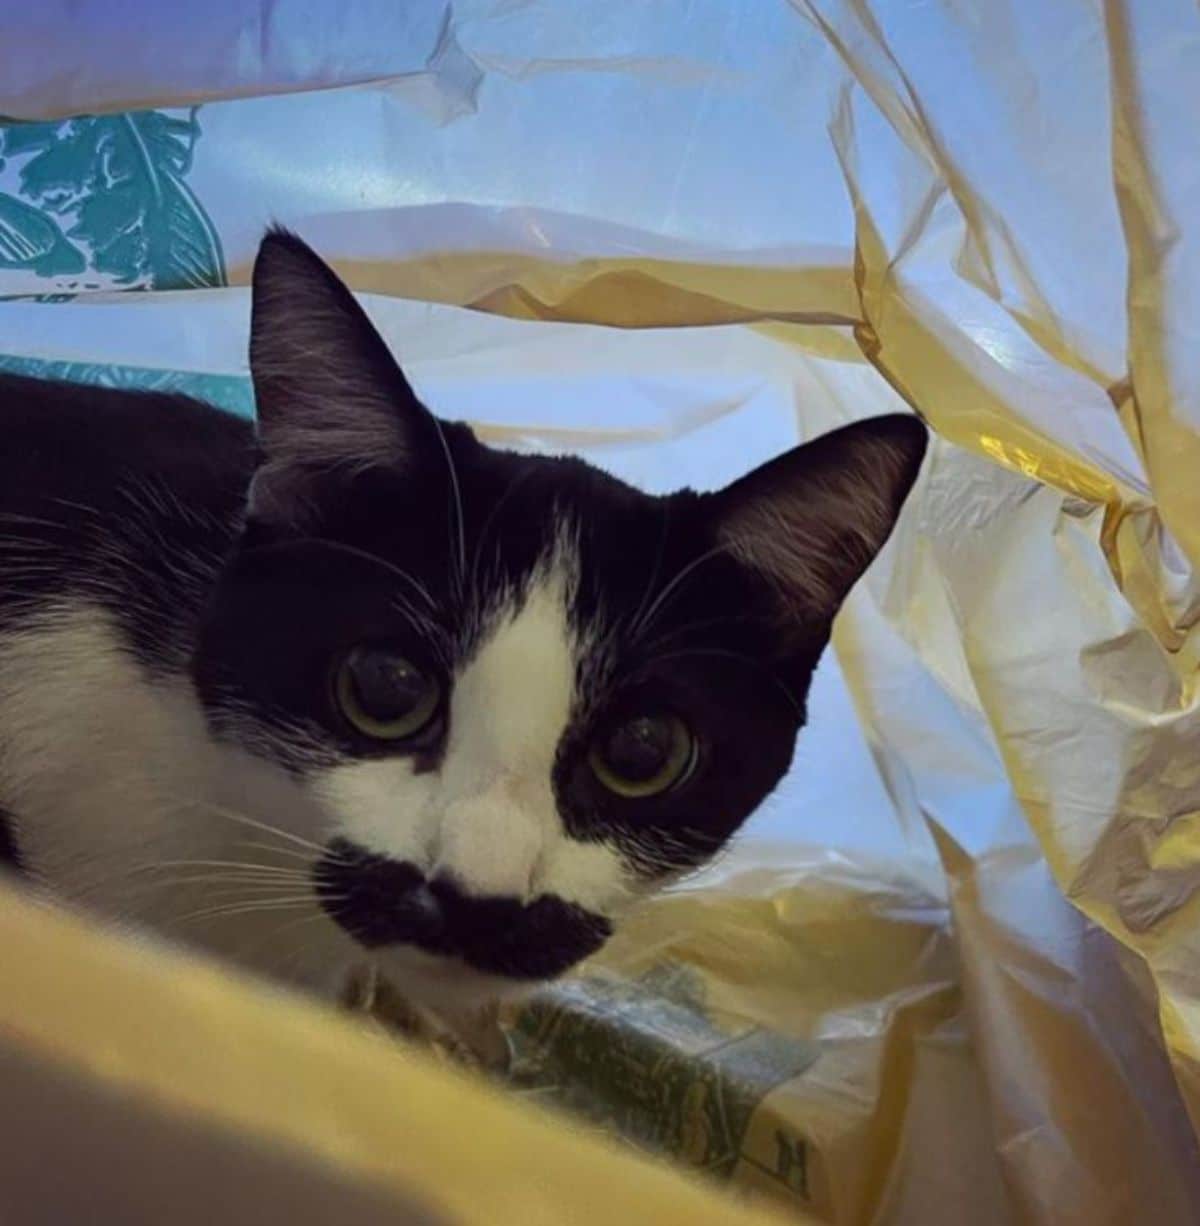 black and white cat with a black moustache inside a plastic bag